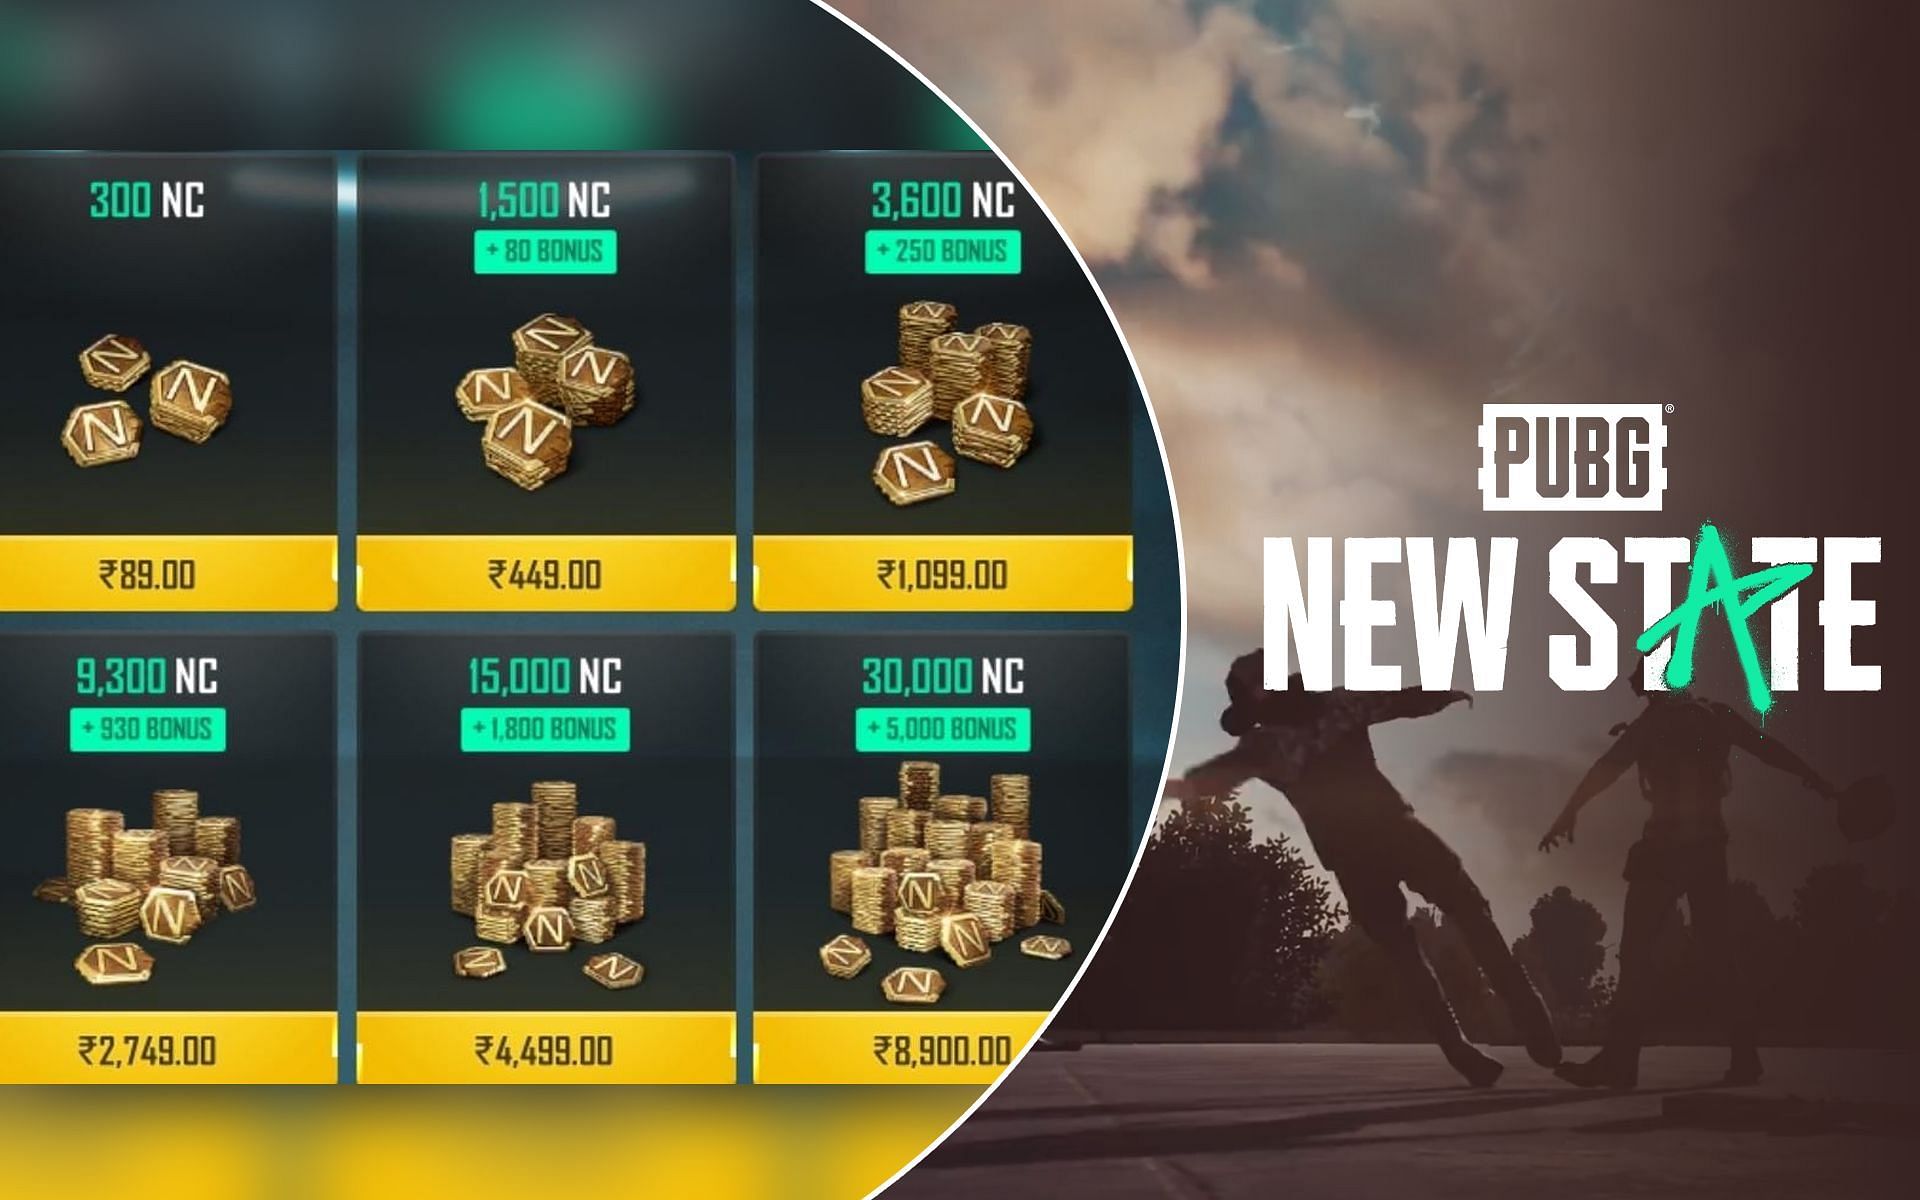 How to get free NC for PUBG New State in India (Image via Sportskeeda)